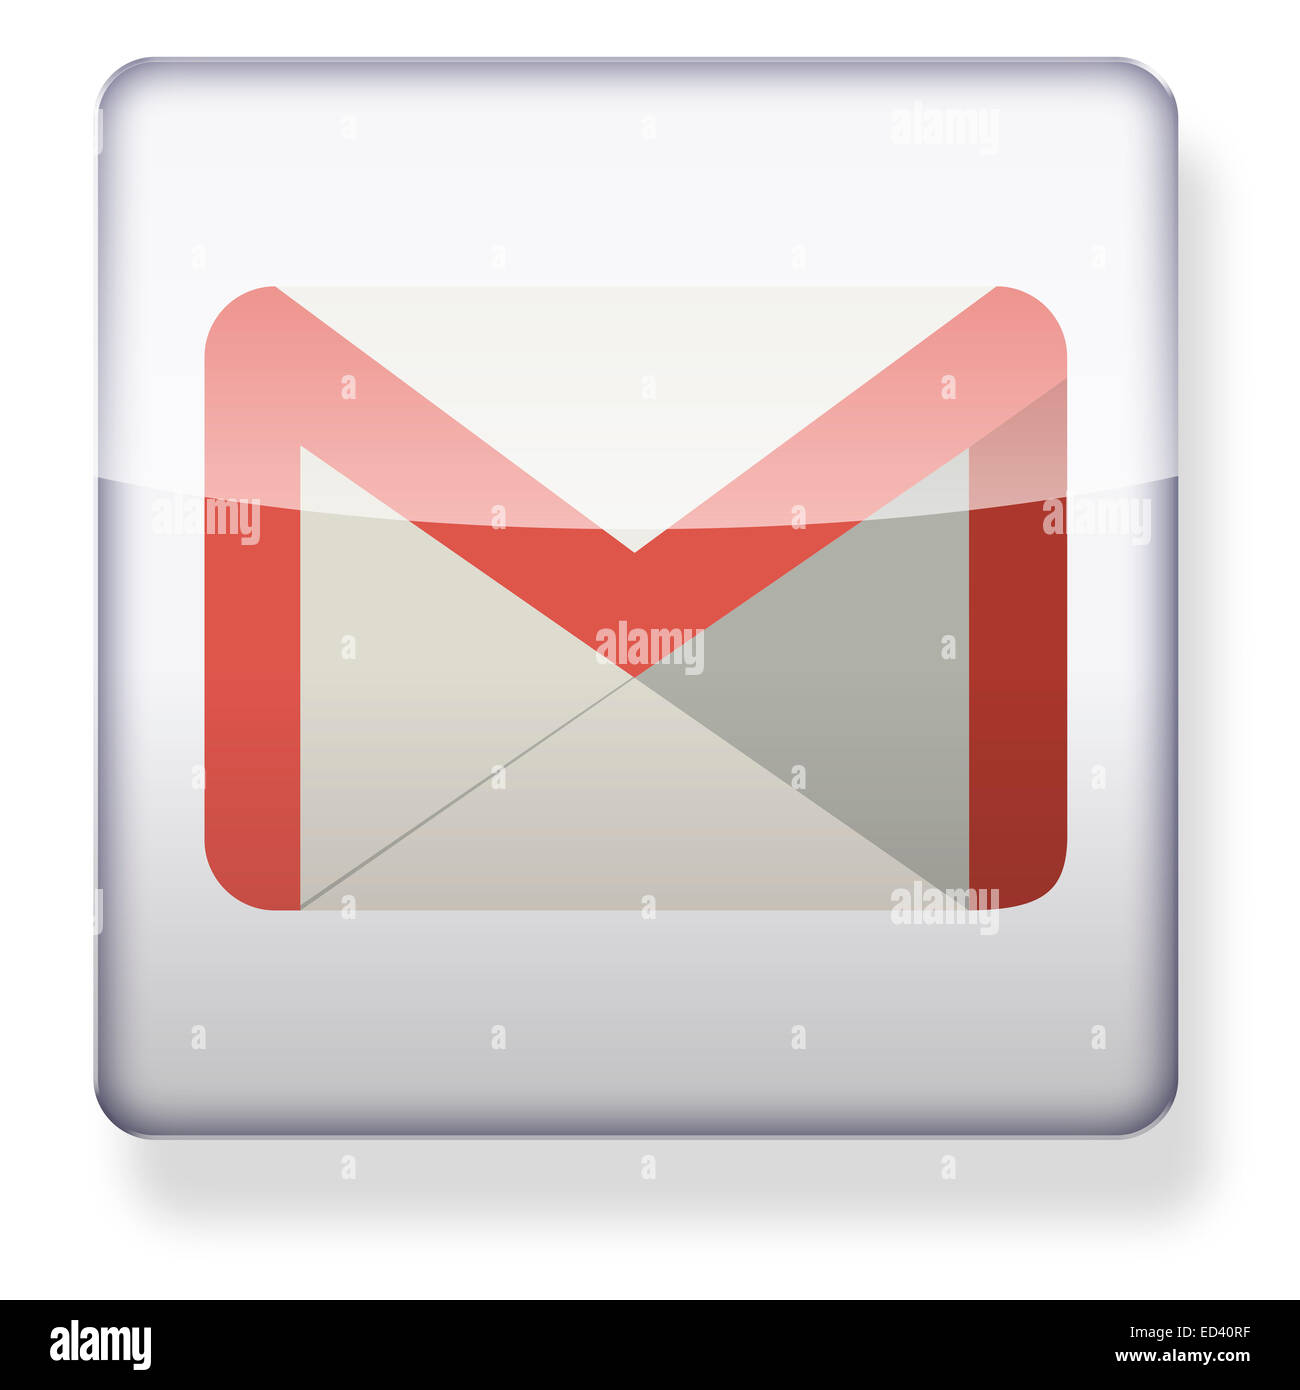 GMail logo as an app icon. Clipping path included. Stock Photo